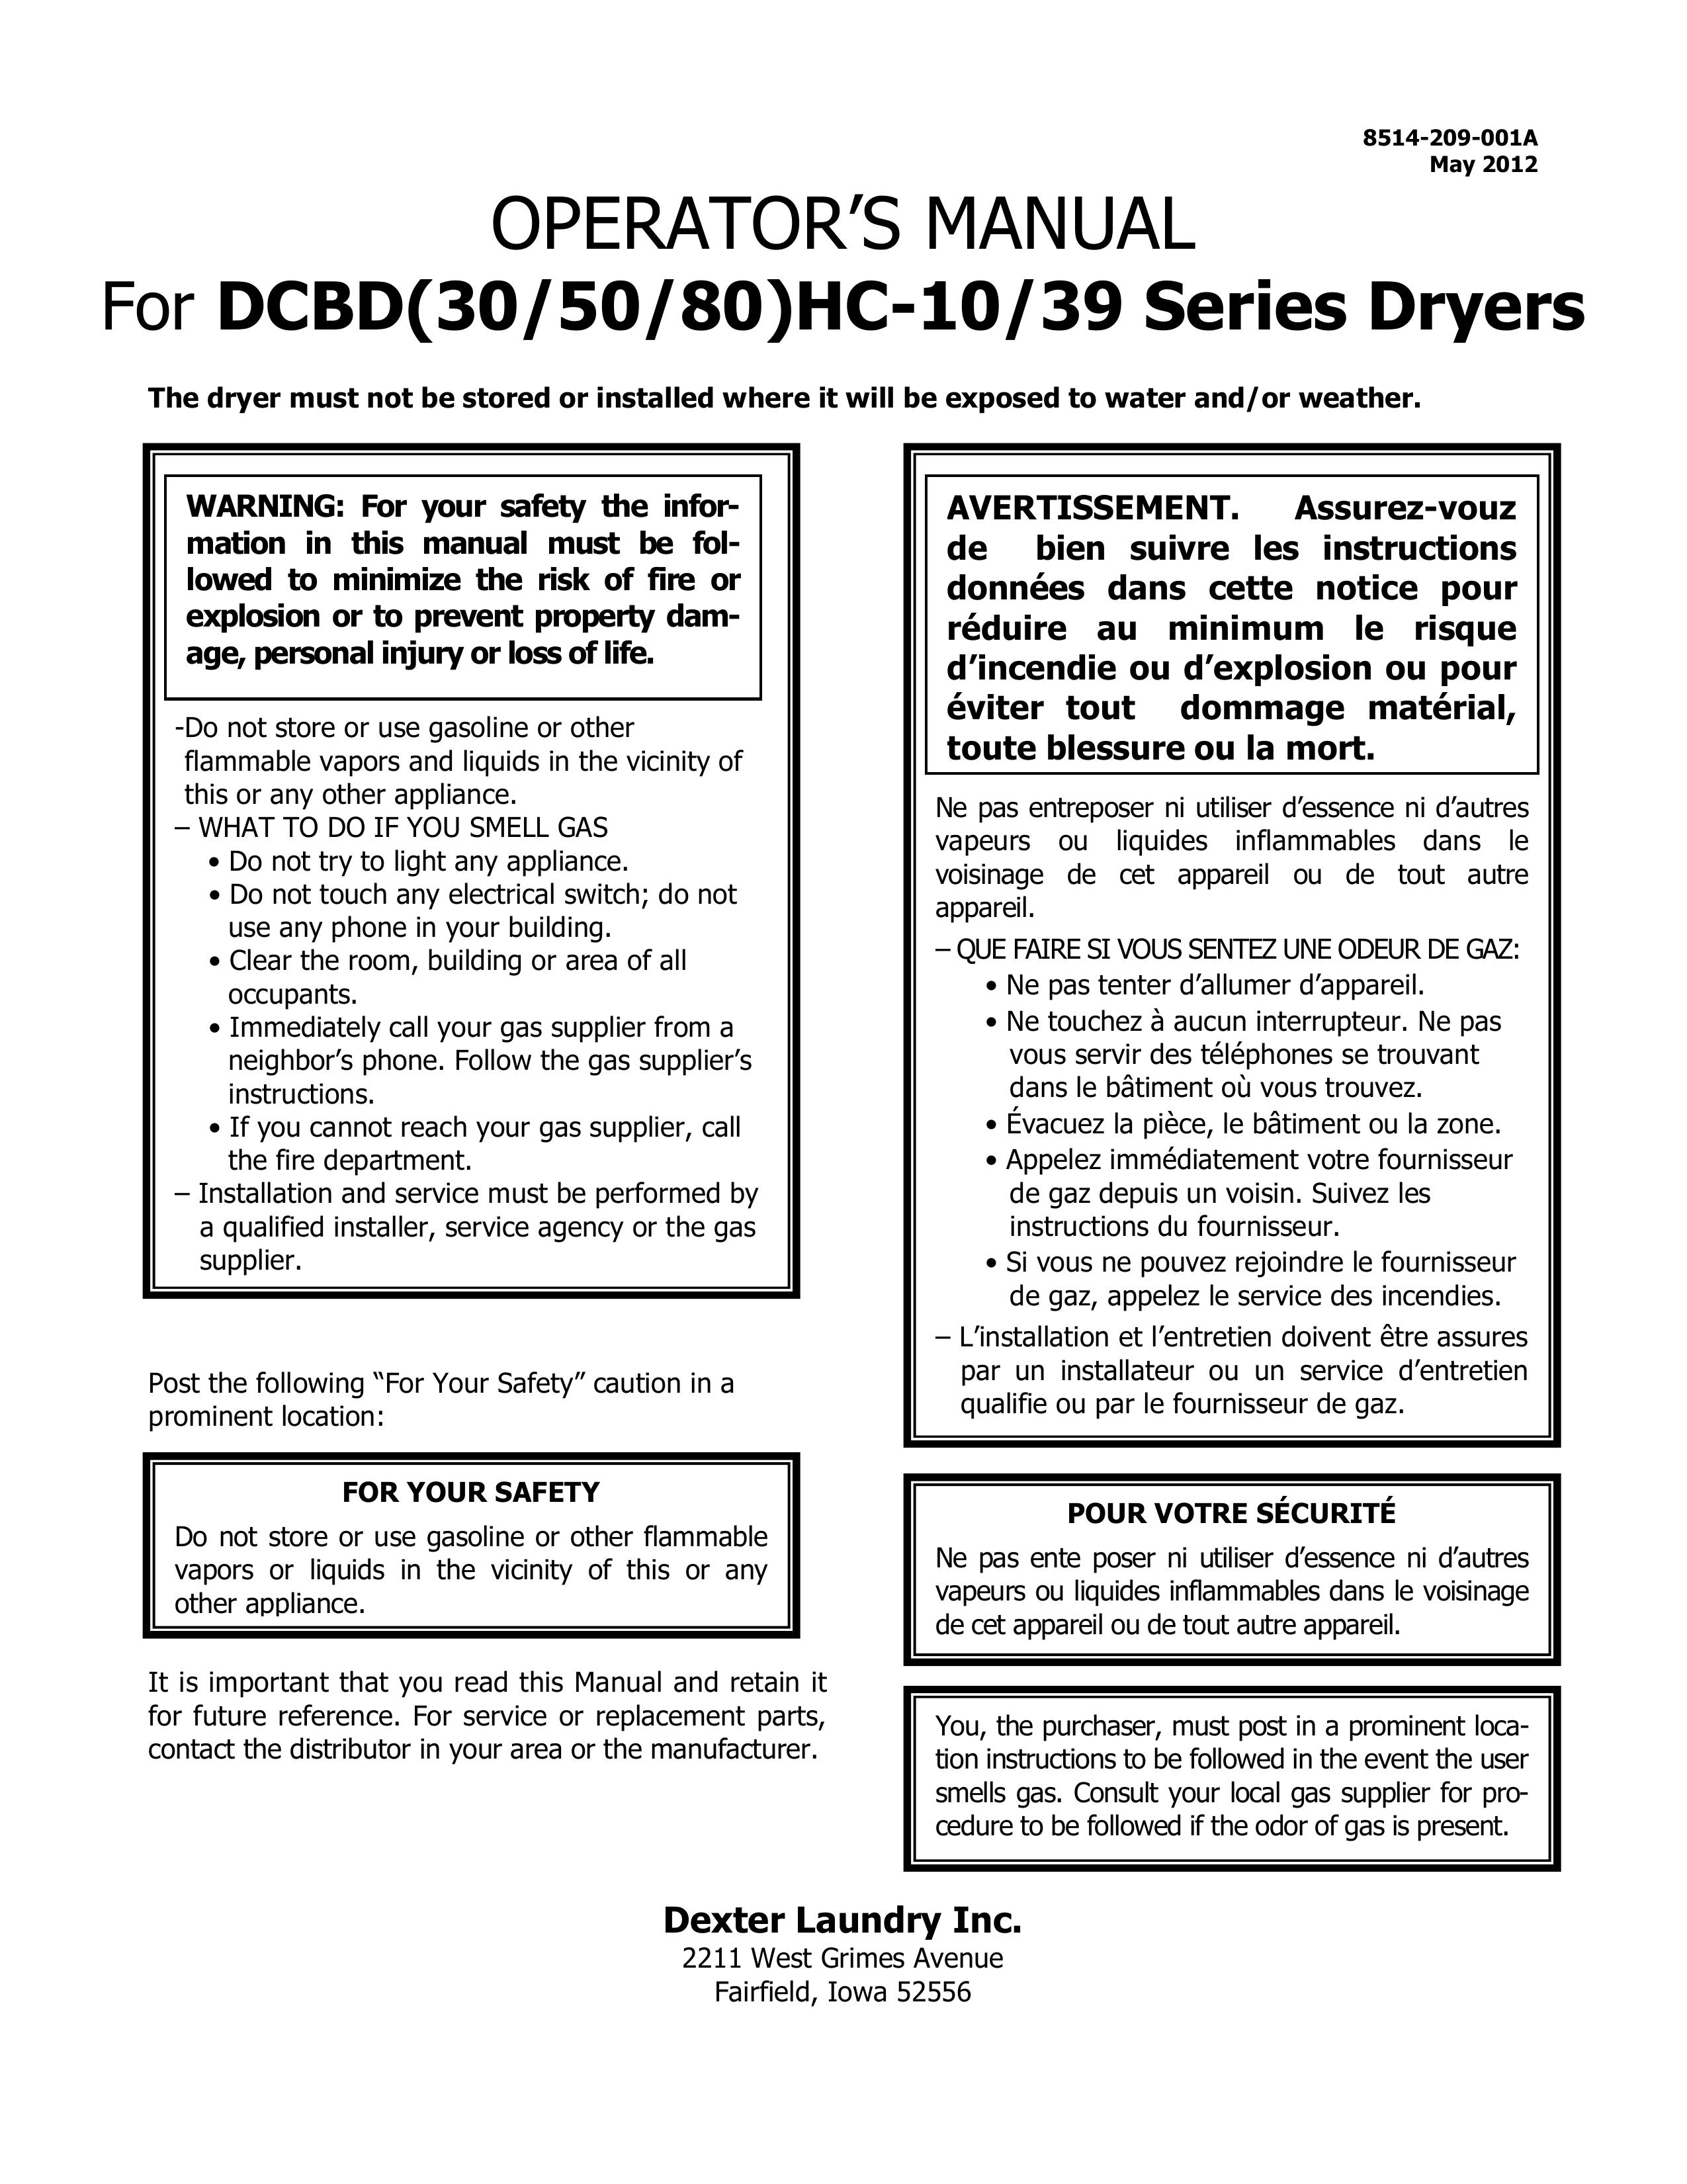 MRV Communications HC-10 Clothes Dryer User Manual